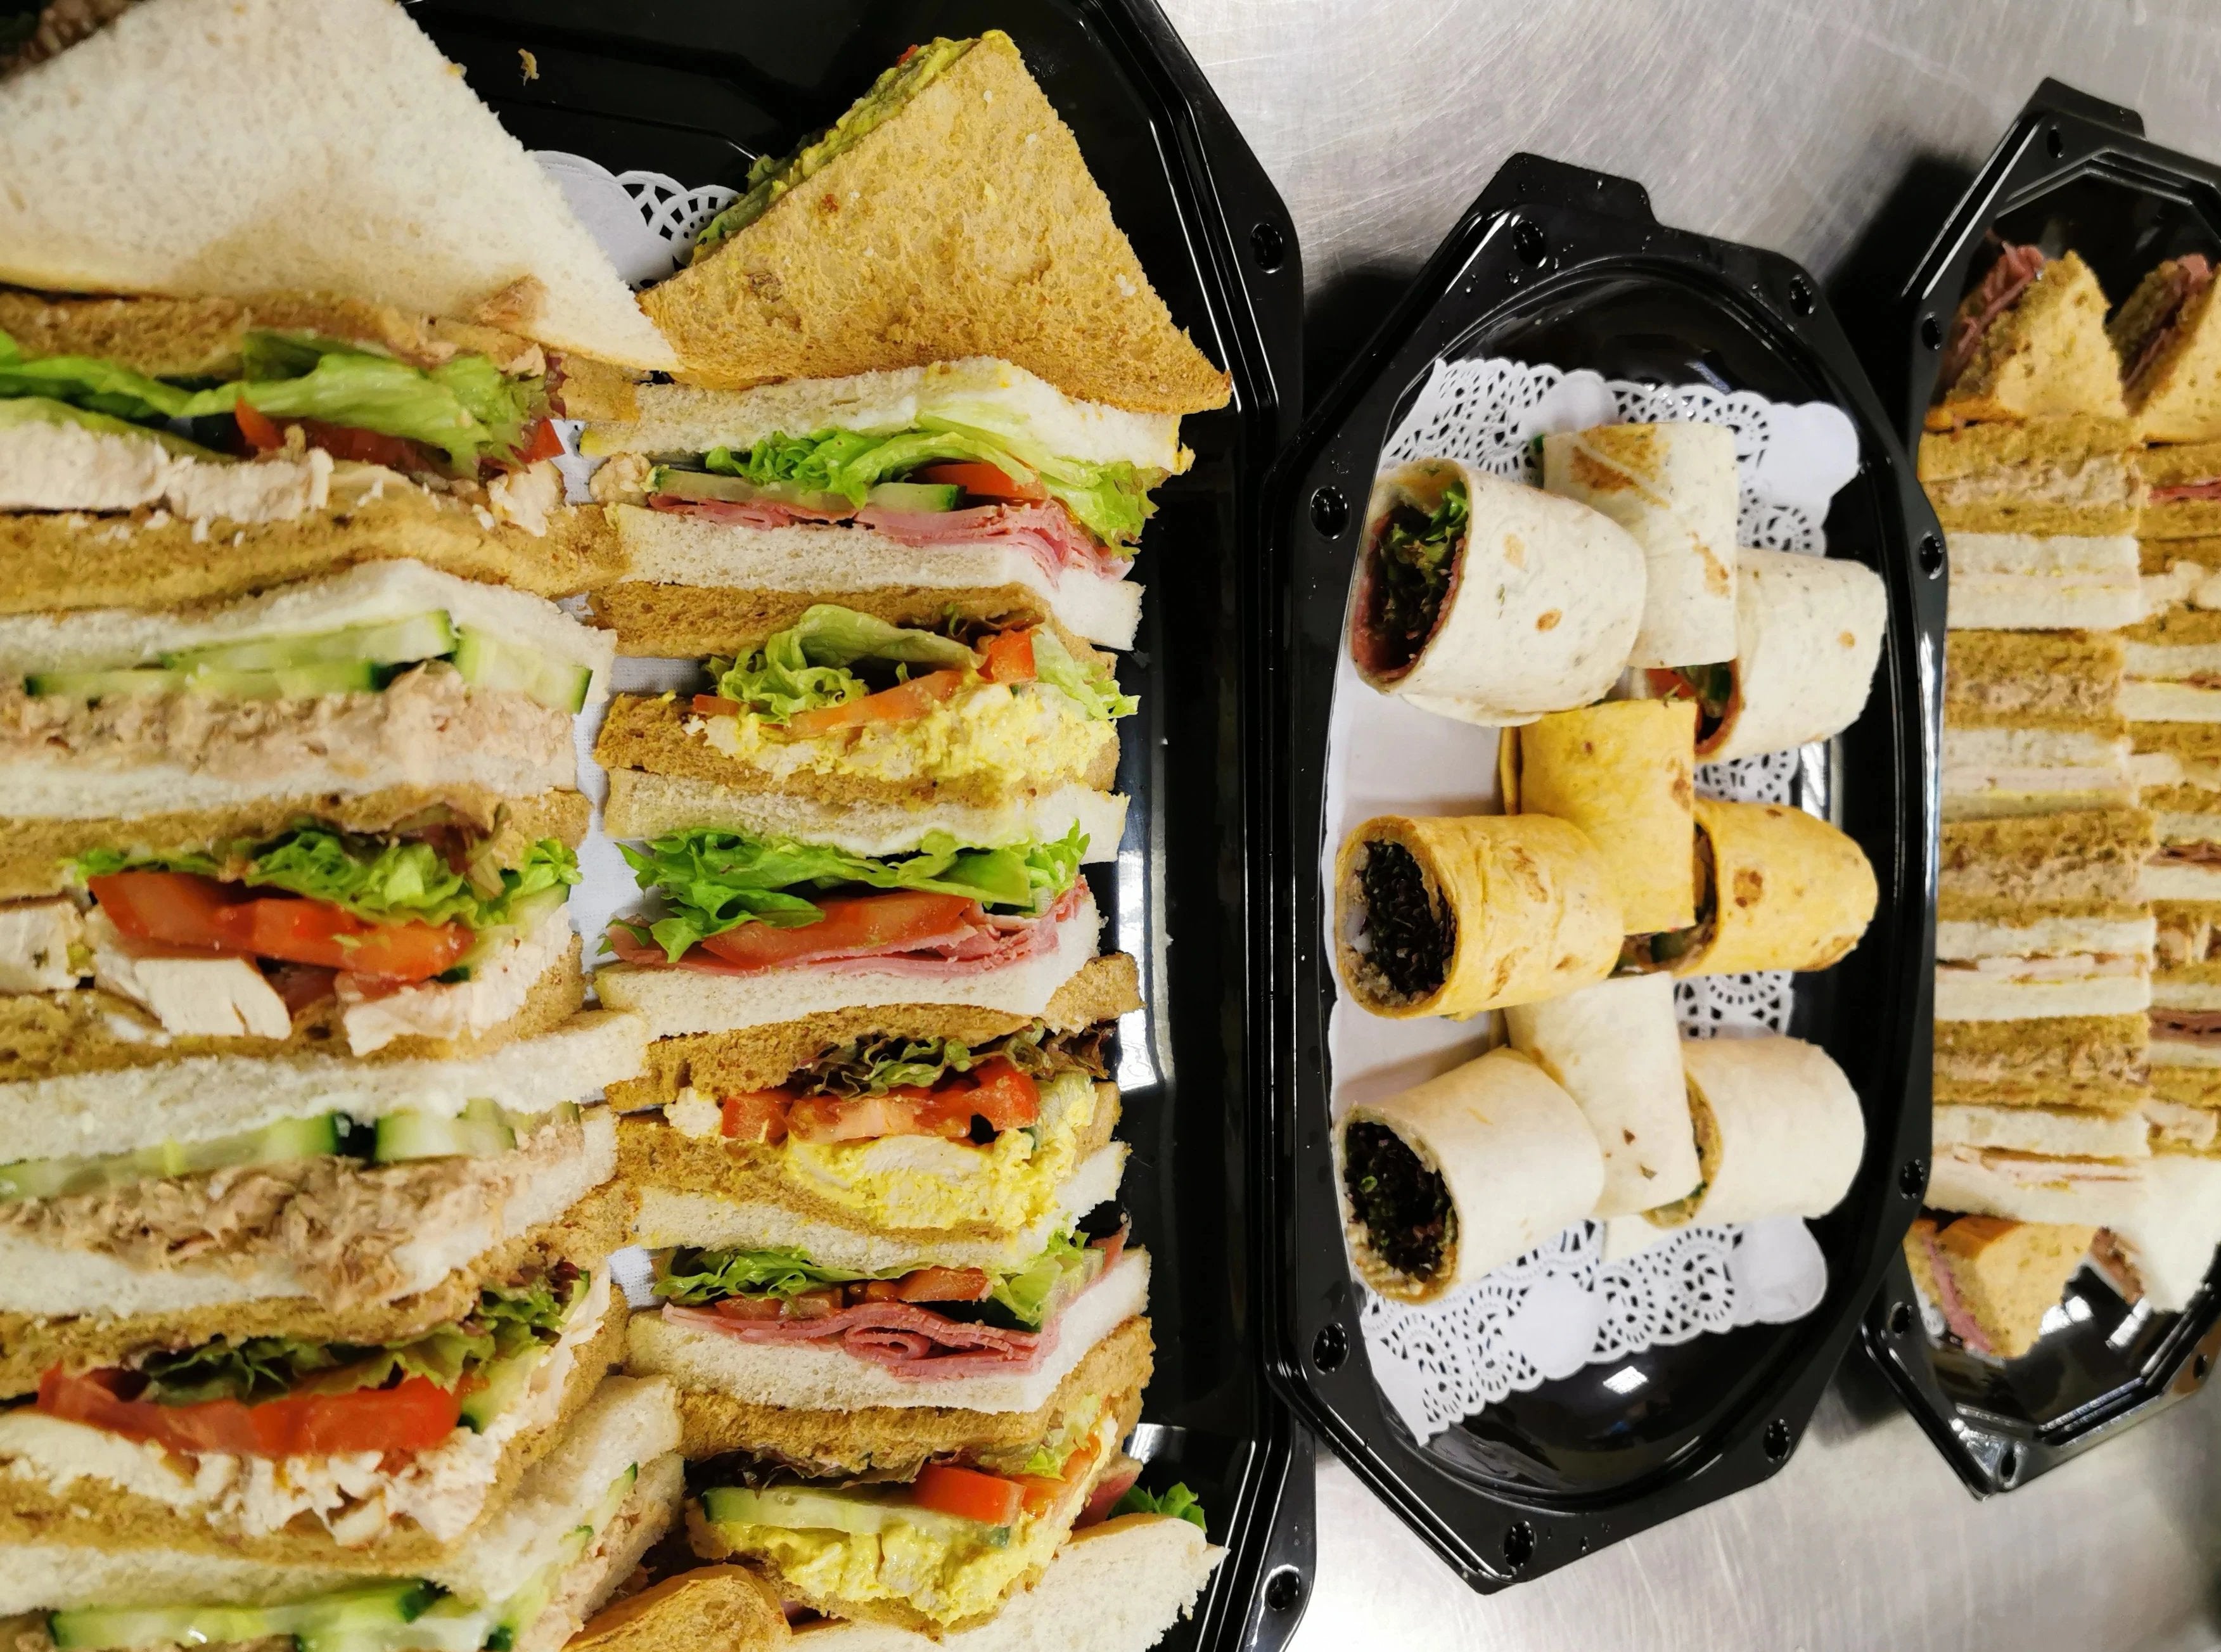 1 - Regular, classic sandwiches and wraps